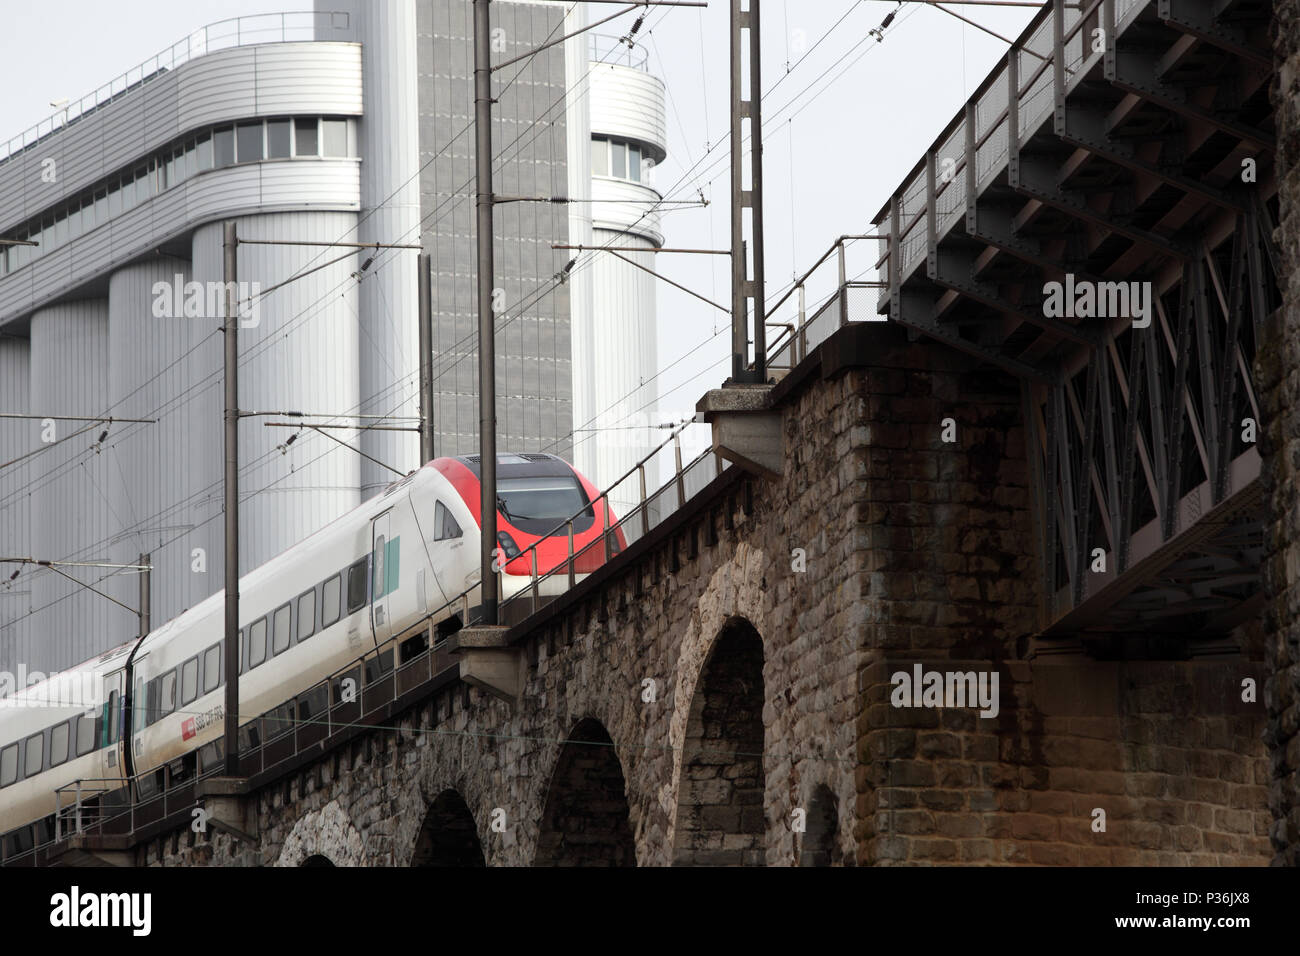 Zurich, Switzerland, train of the Swiss Federal Railways drives on a viaduct Stock Photo